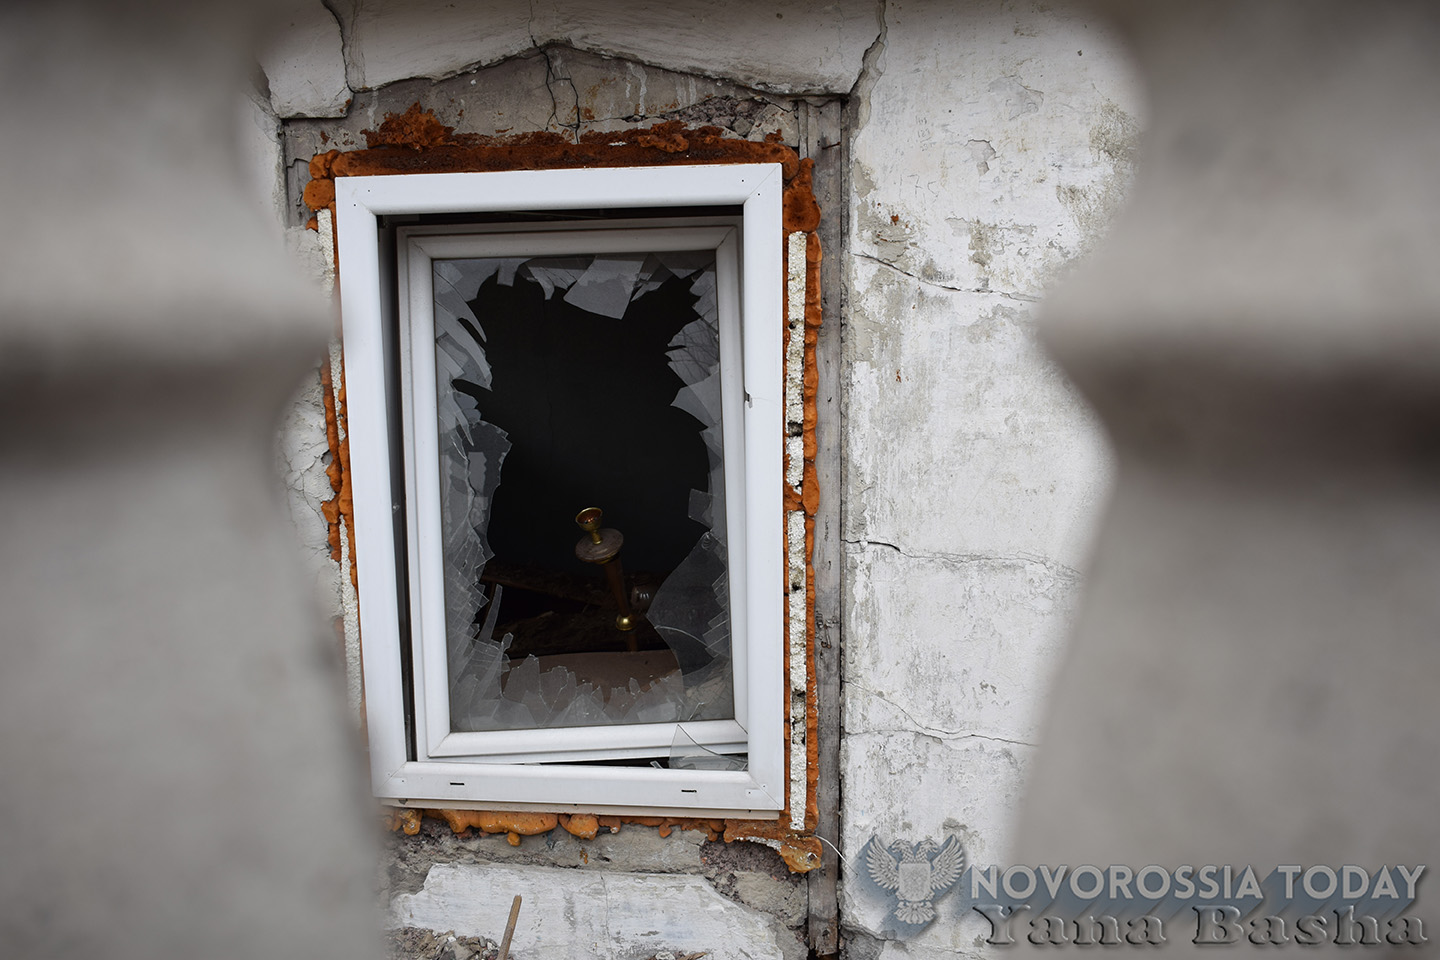 DPR authorities reported about sudden escalation at the front before coming new stage of the ceasefire regime